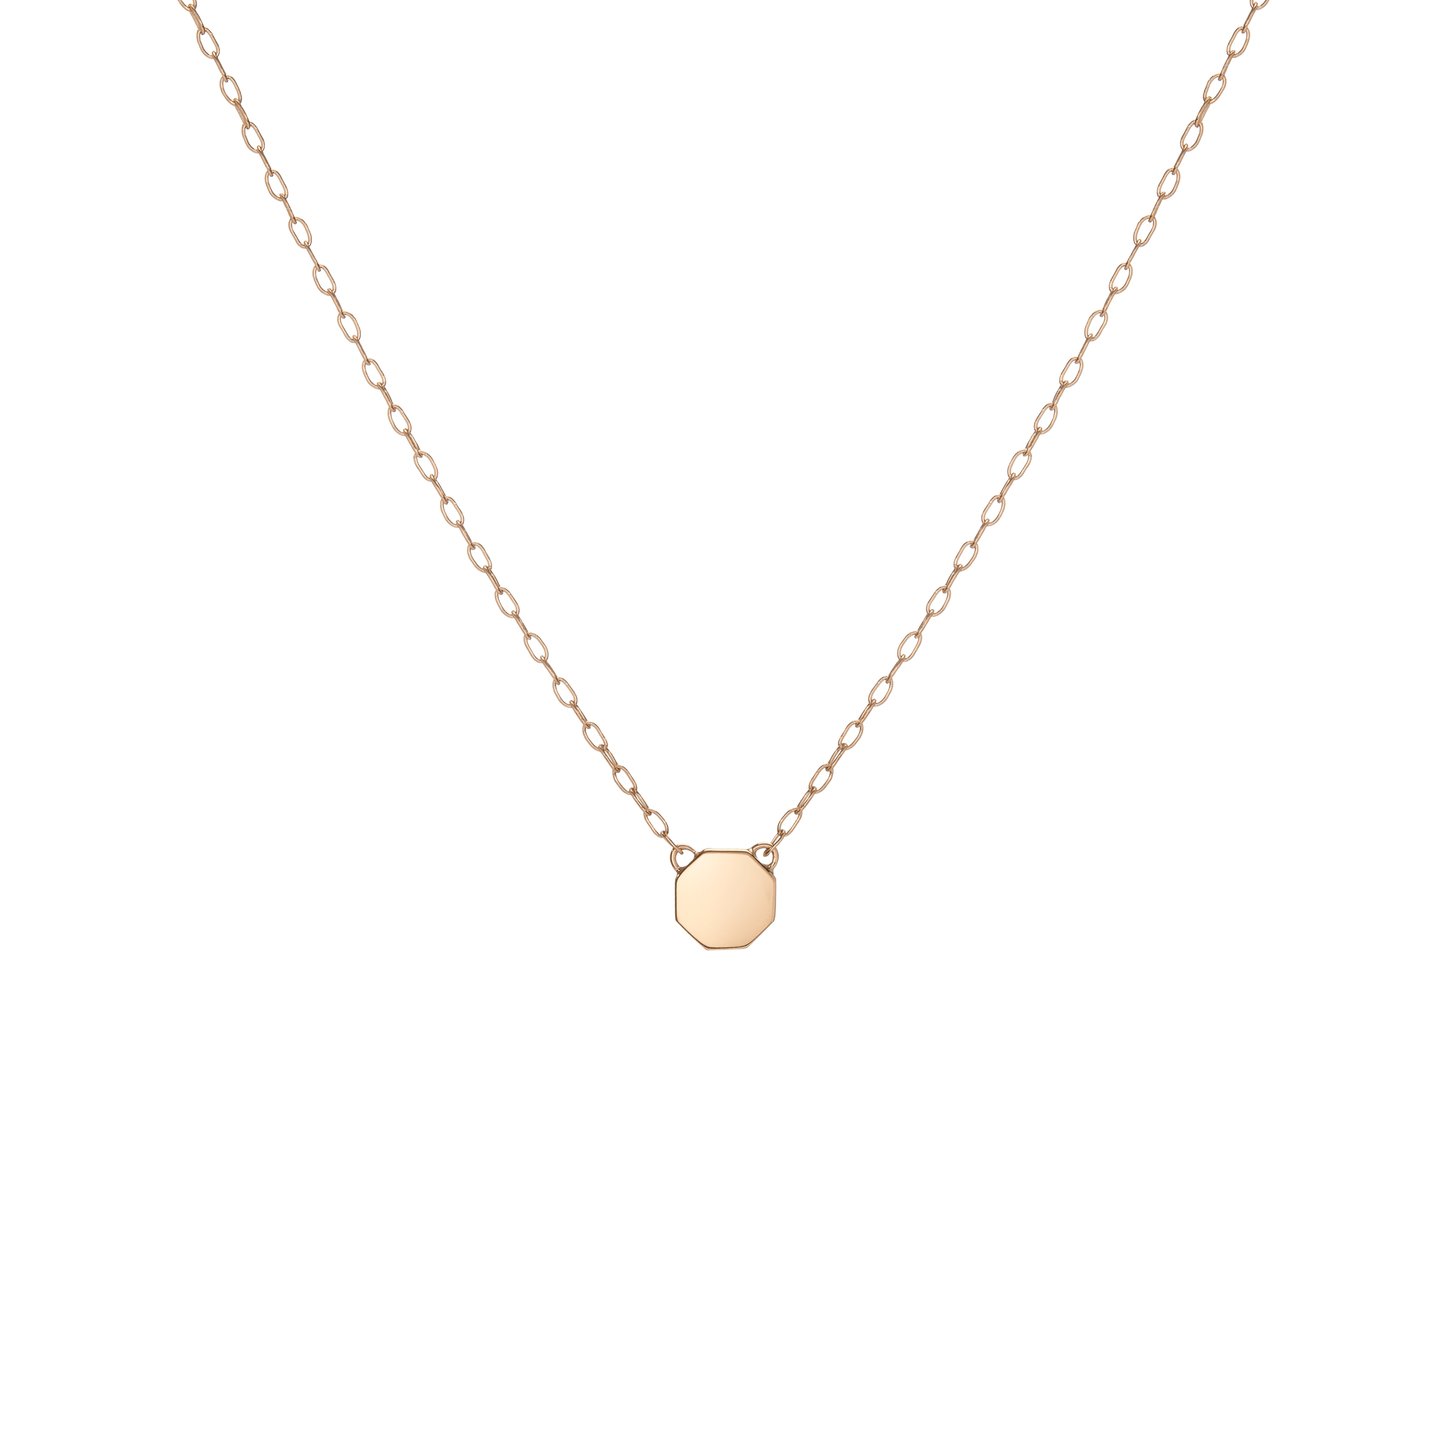 National Jewelry Day: Jennifer Fisher Stop Pendant and More | Us Weekly